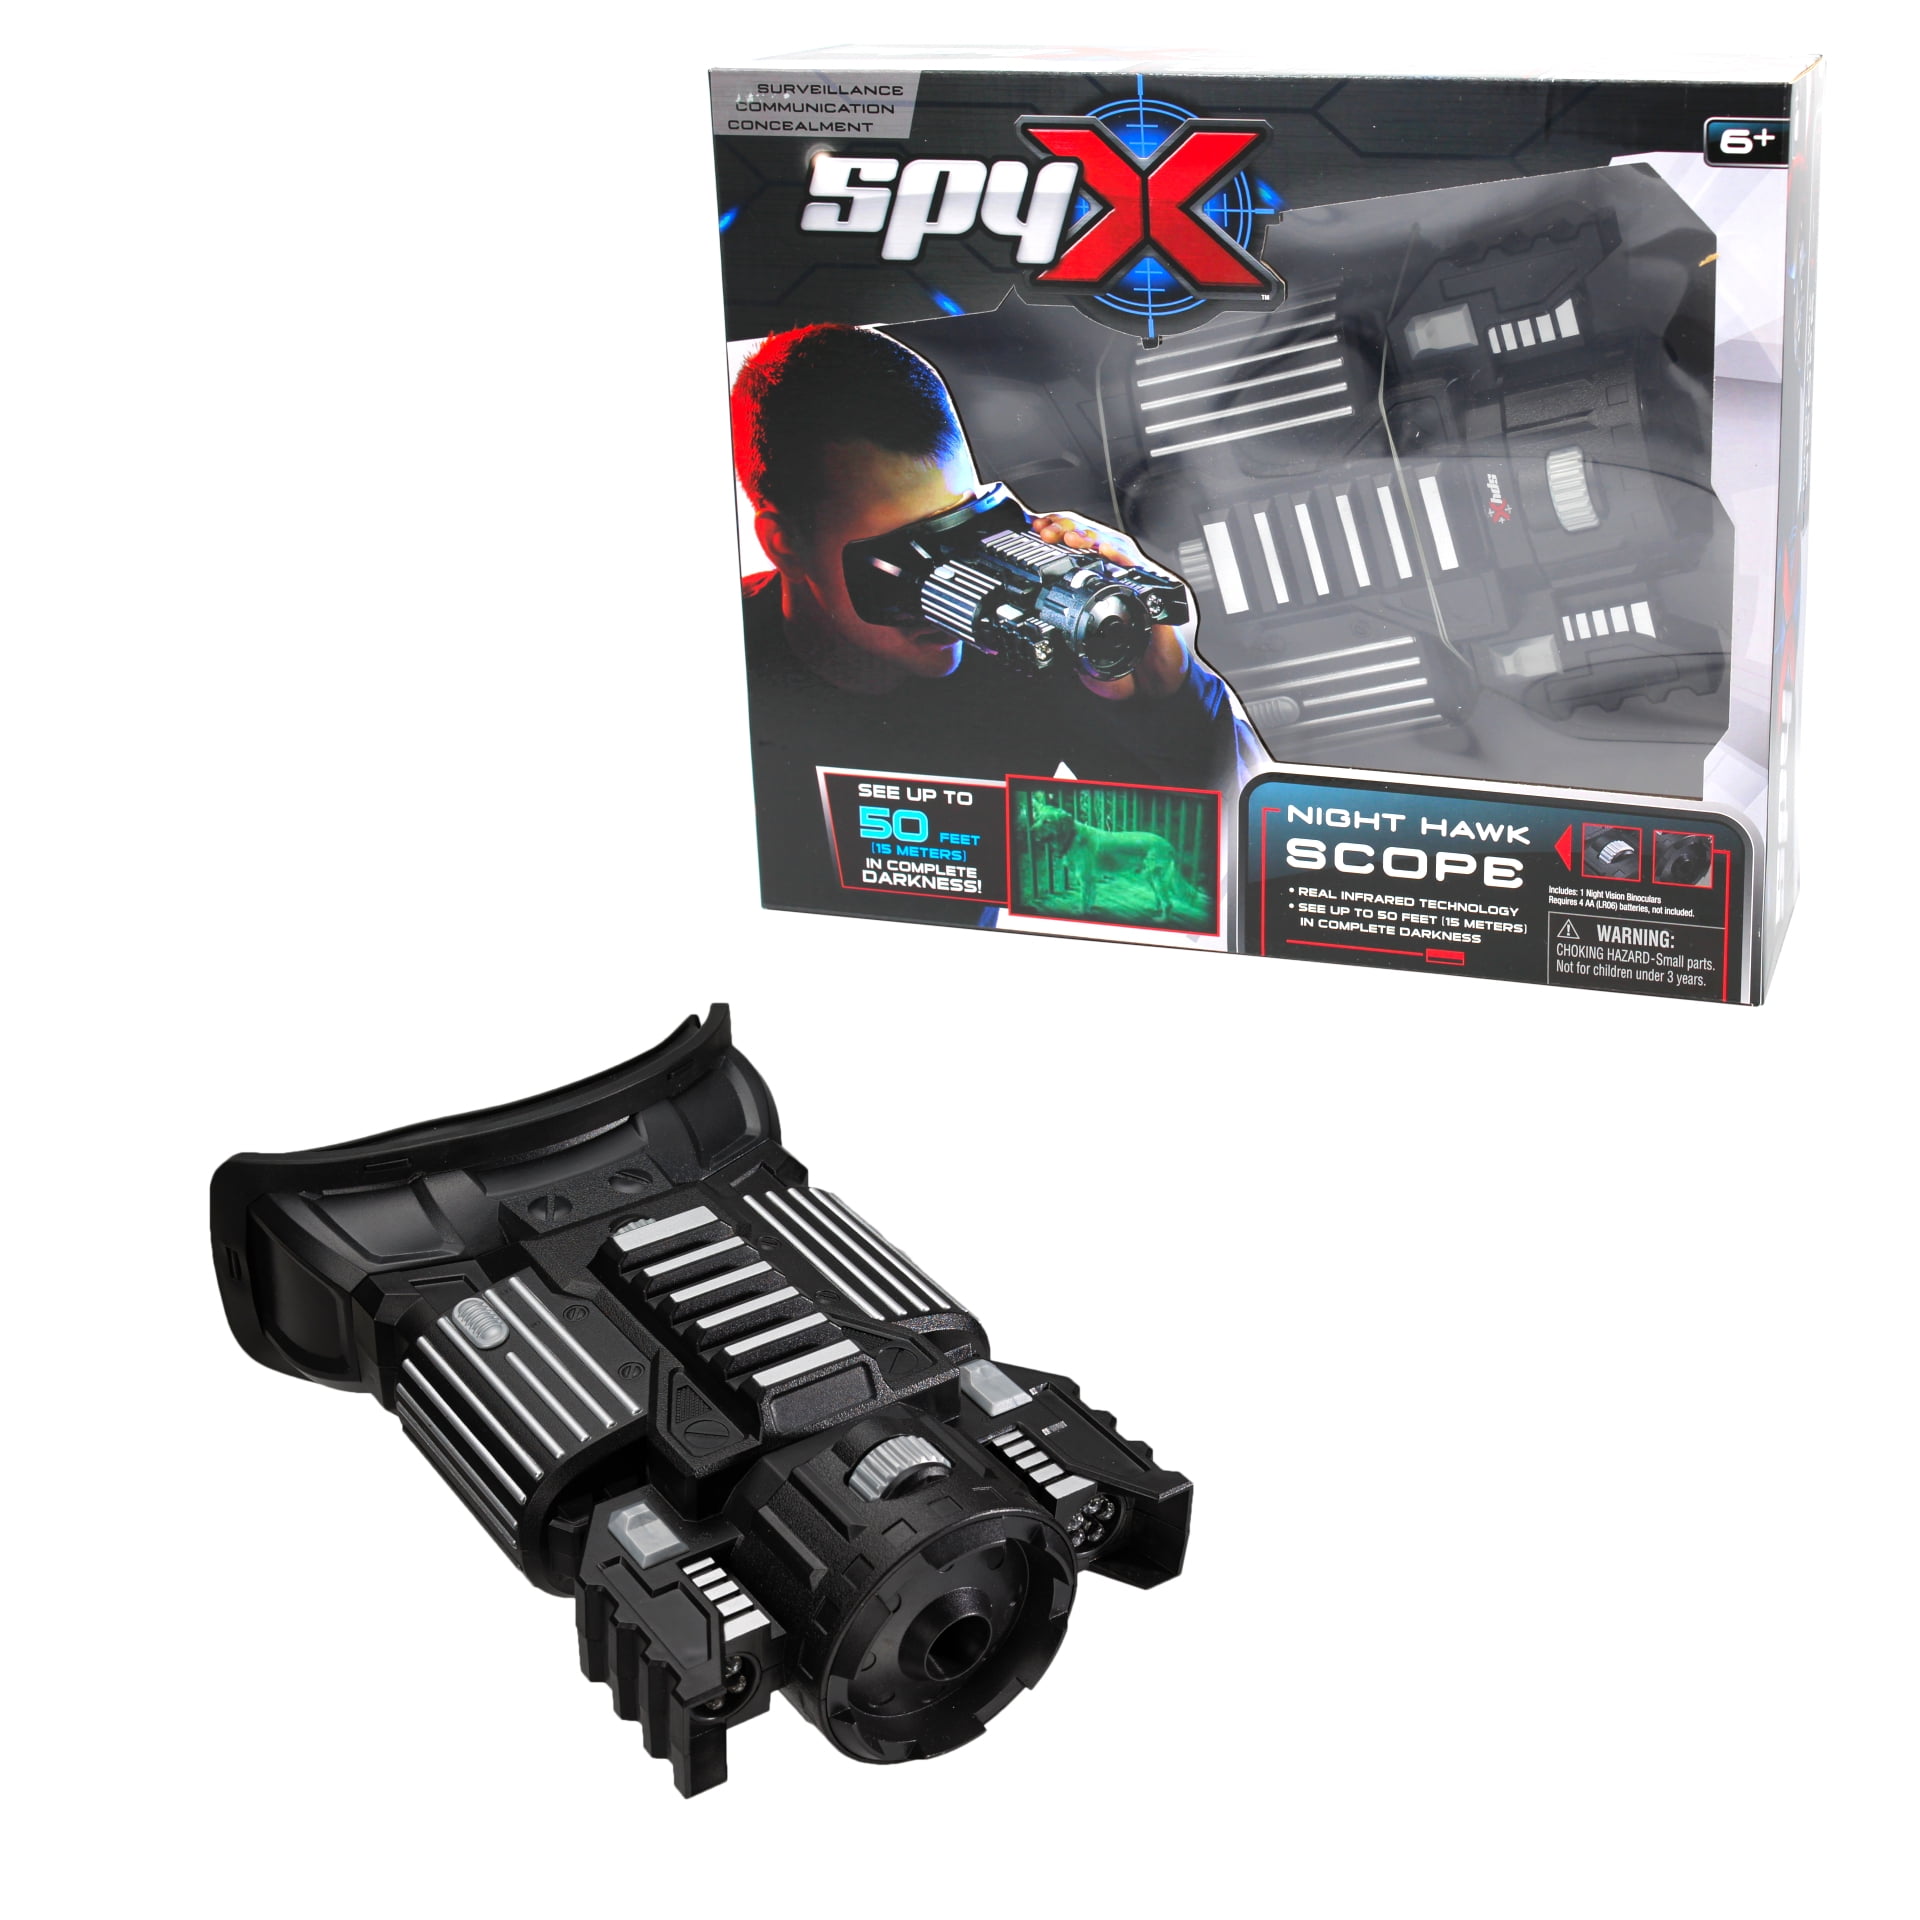 SpyX Night Hawk Scope - Real Infrared Night Vision Lets You See up